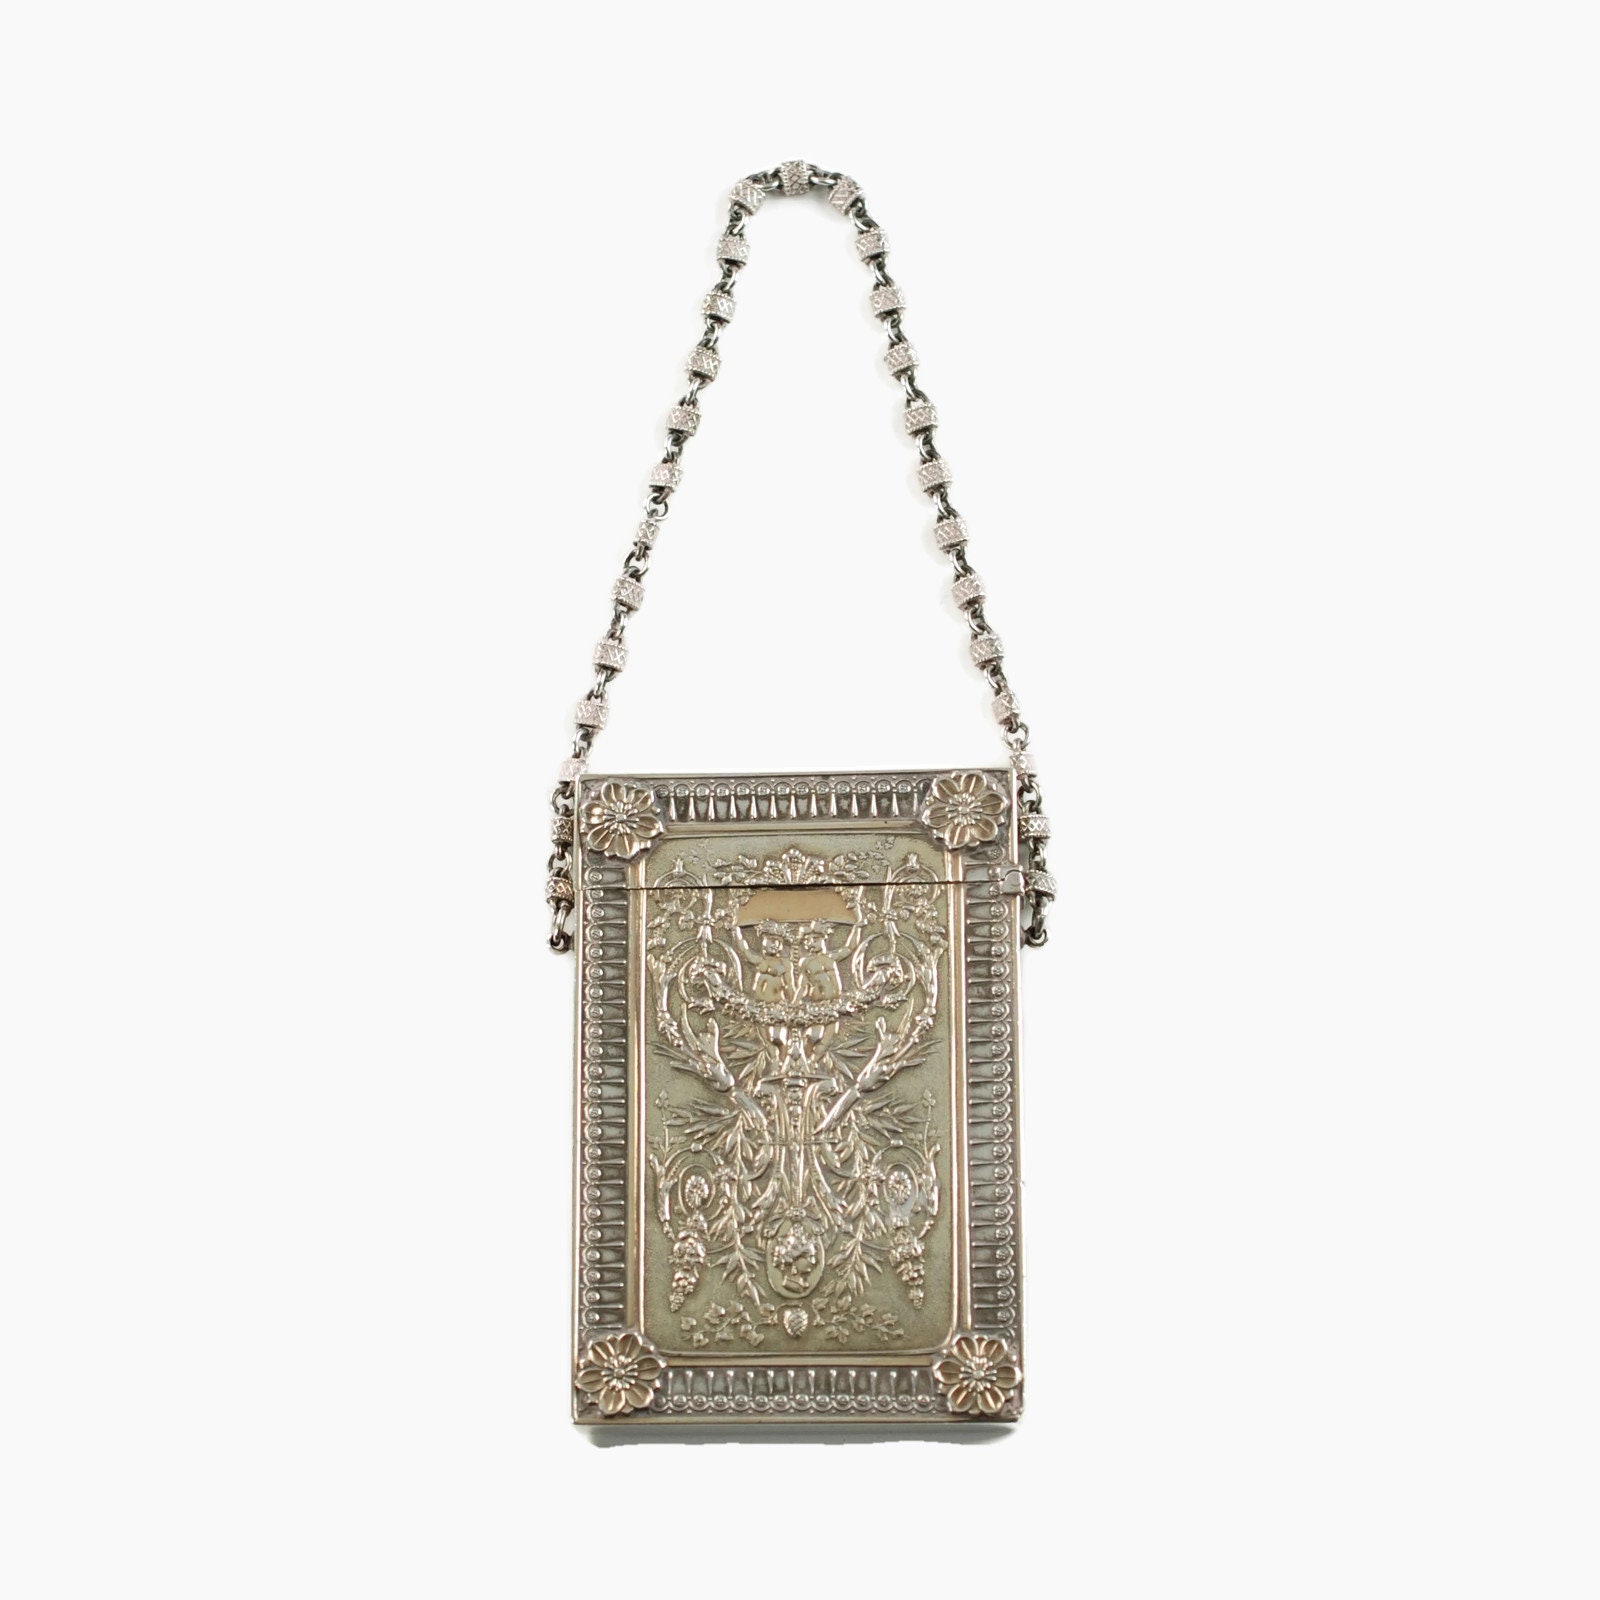 Sold at Auction: Monogrammed silver handbag purse with scarf